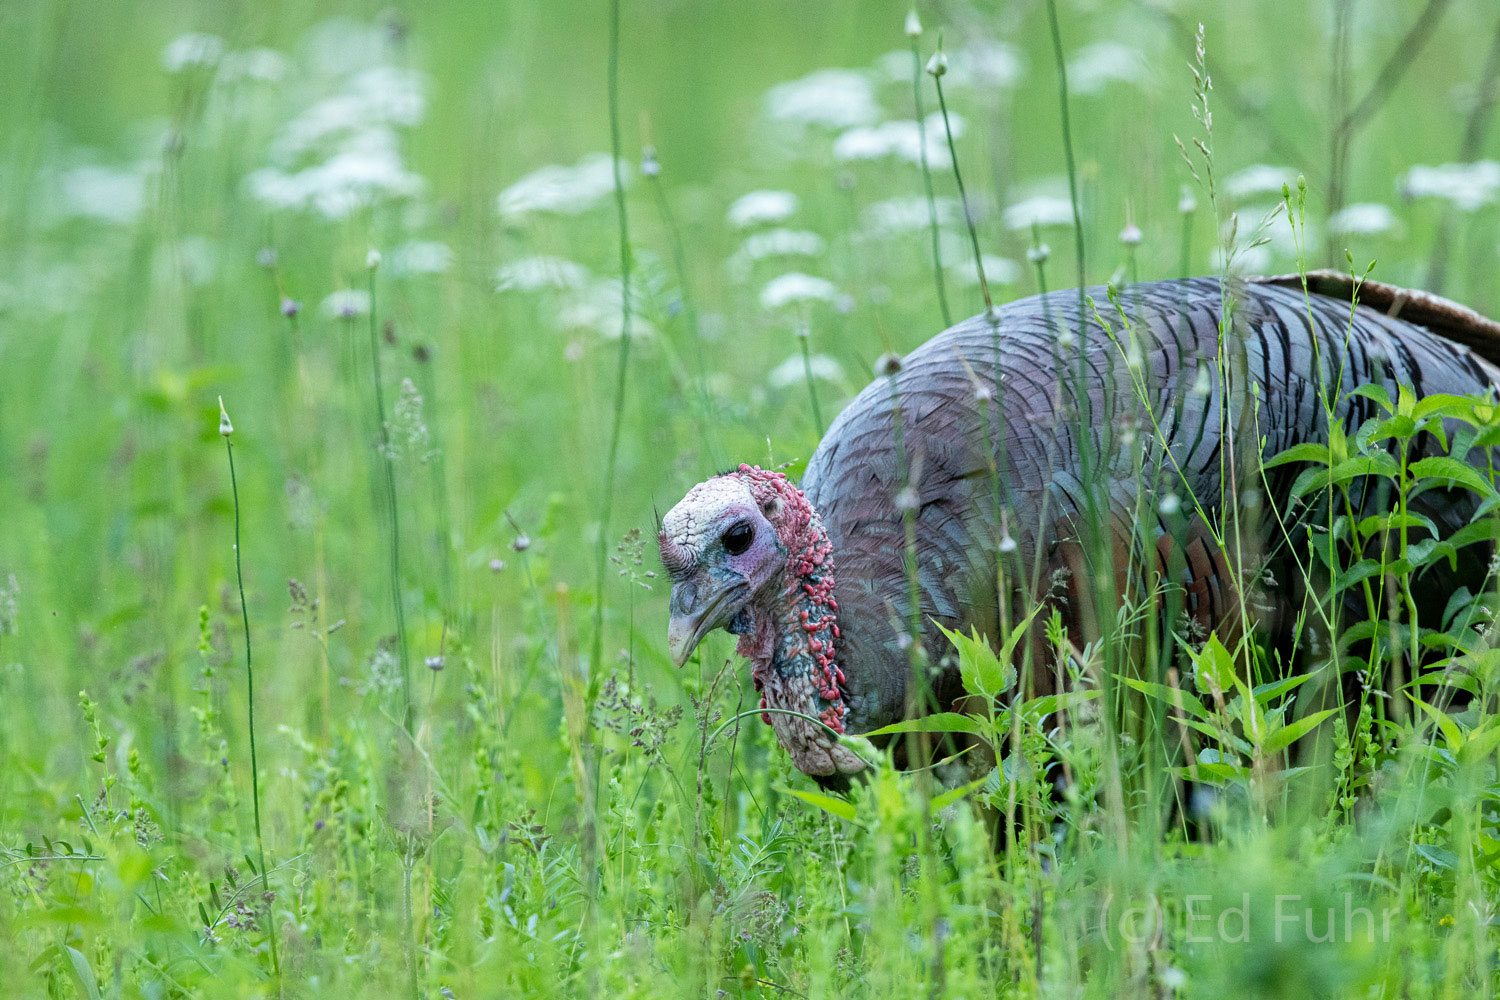 A turkey searches for insects on the dew-laden grasses on this spring morning.